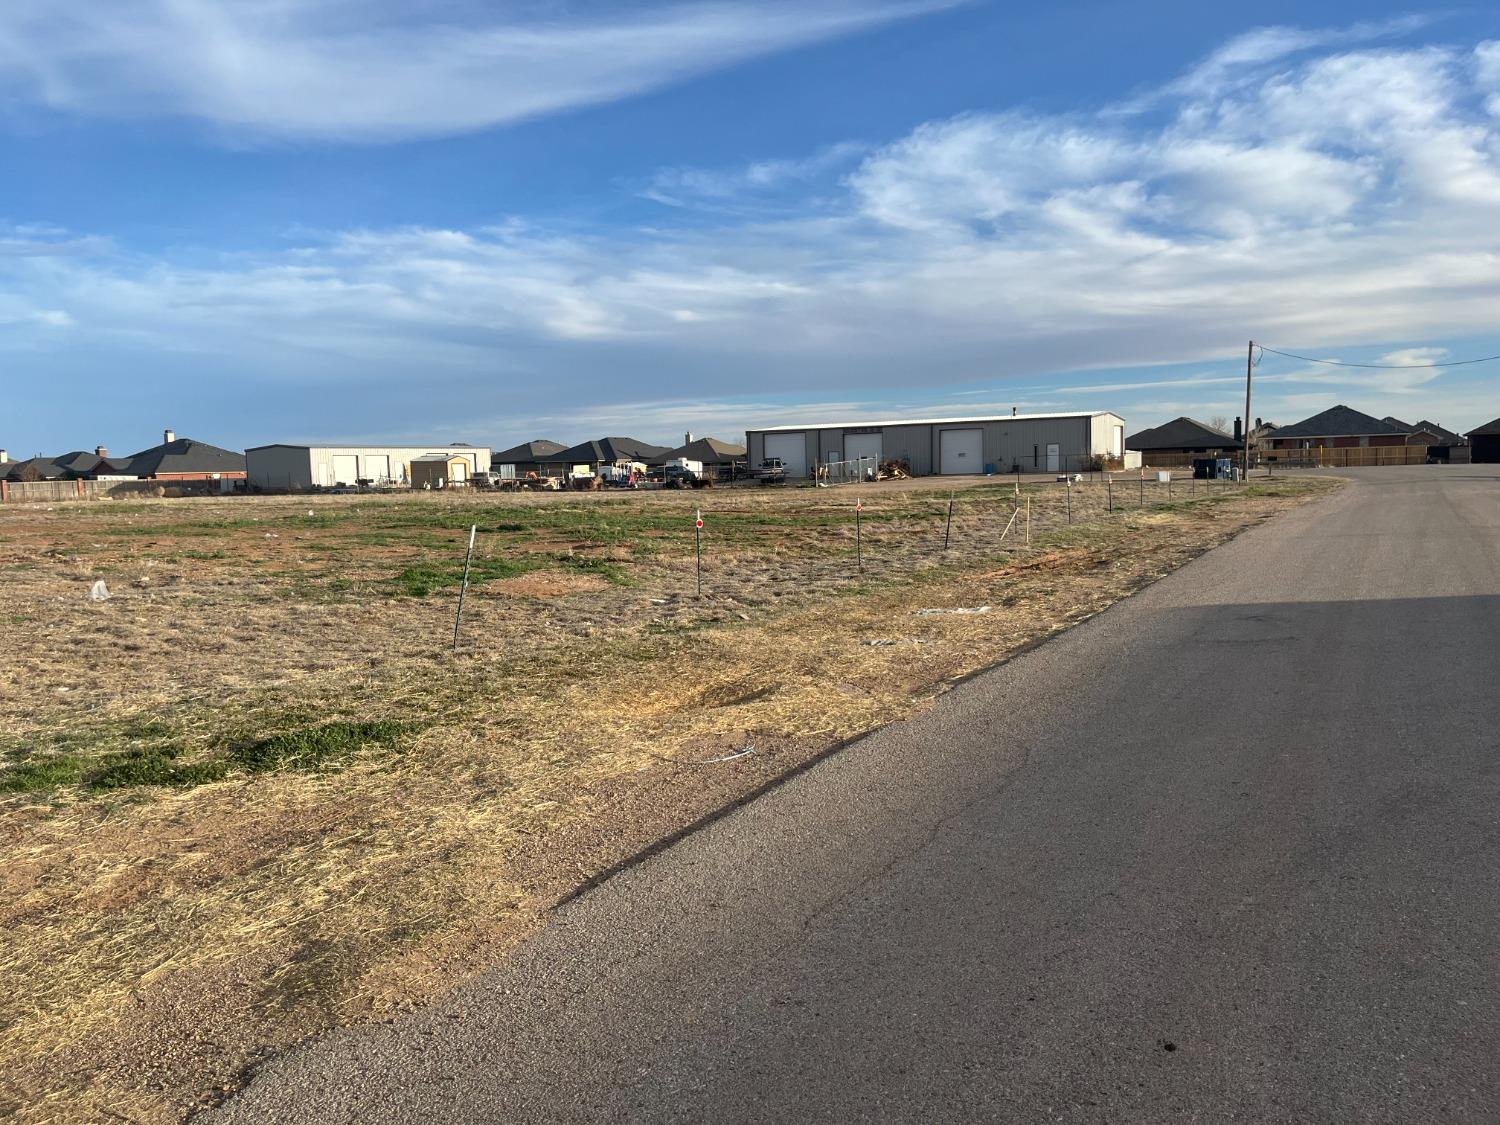 This can be purchased and used for different purposes. Utilities also are available. Located in the Southwest part of Lubbock, this is a growing area. Priced to sell, the opportunities are for you. This can be purchased with 8209 Zanda as well.